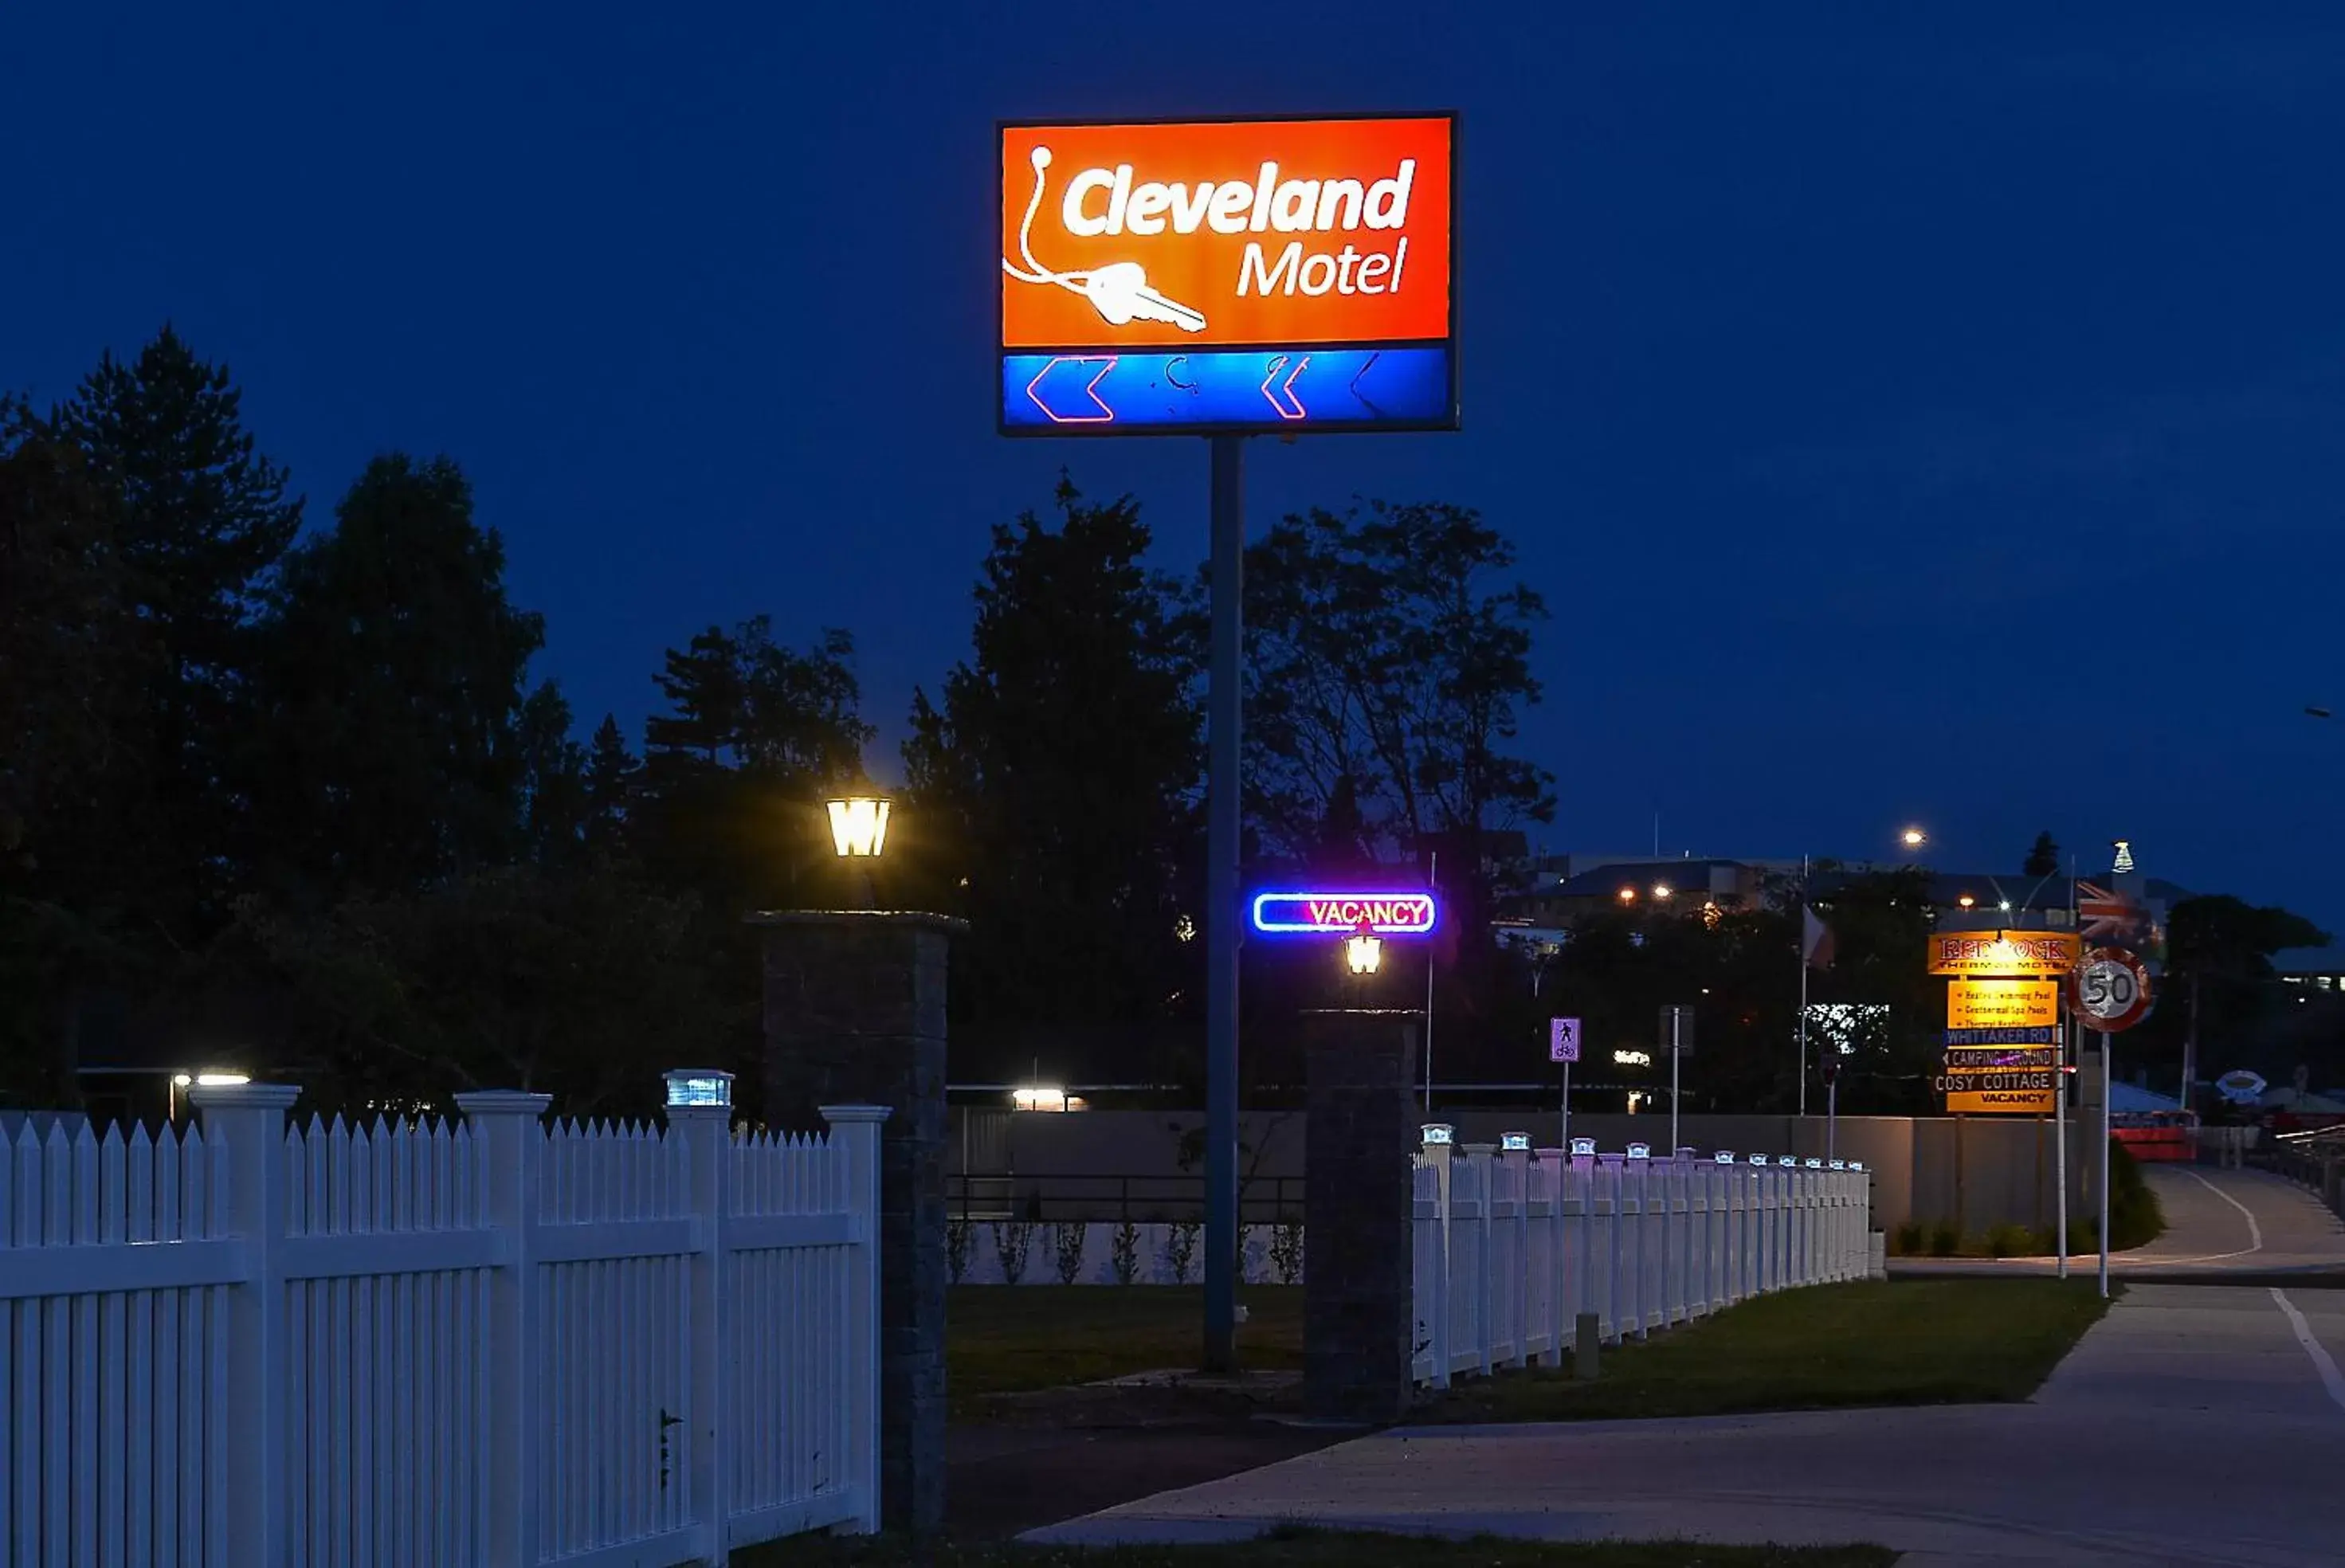 Property logo or sign, Property Building in Cleveland Thermal Motel